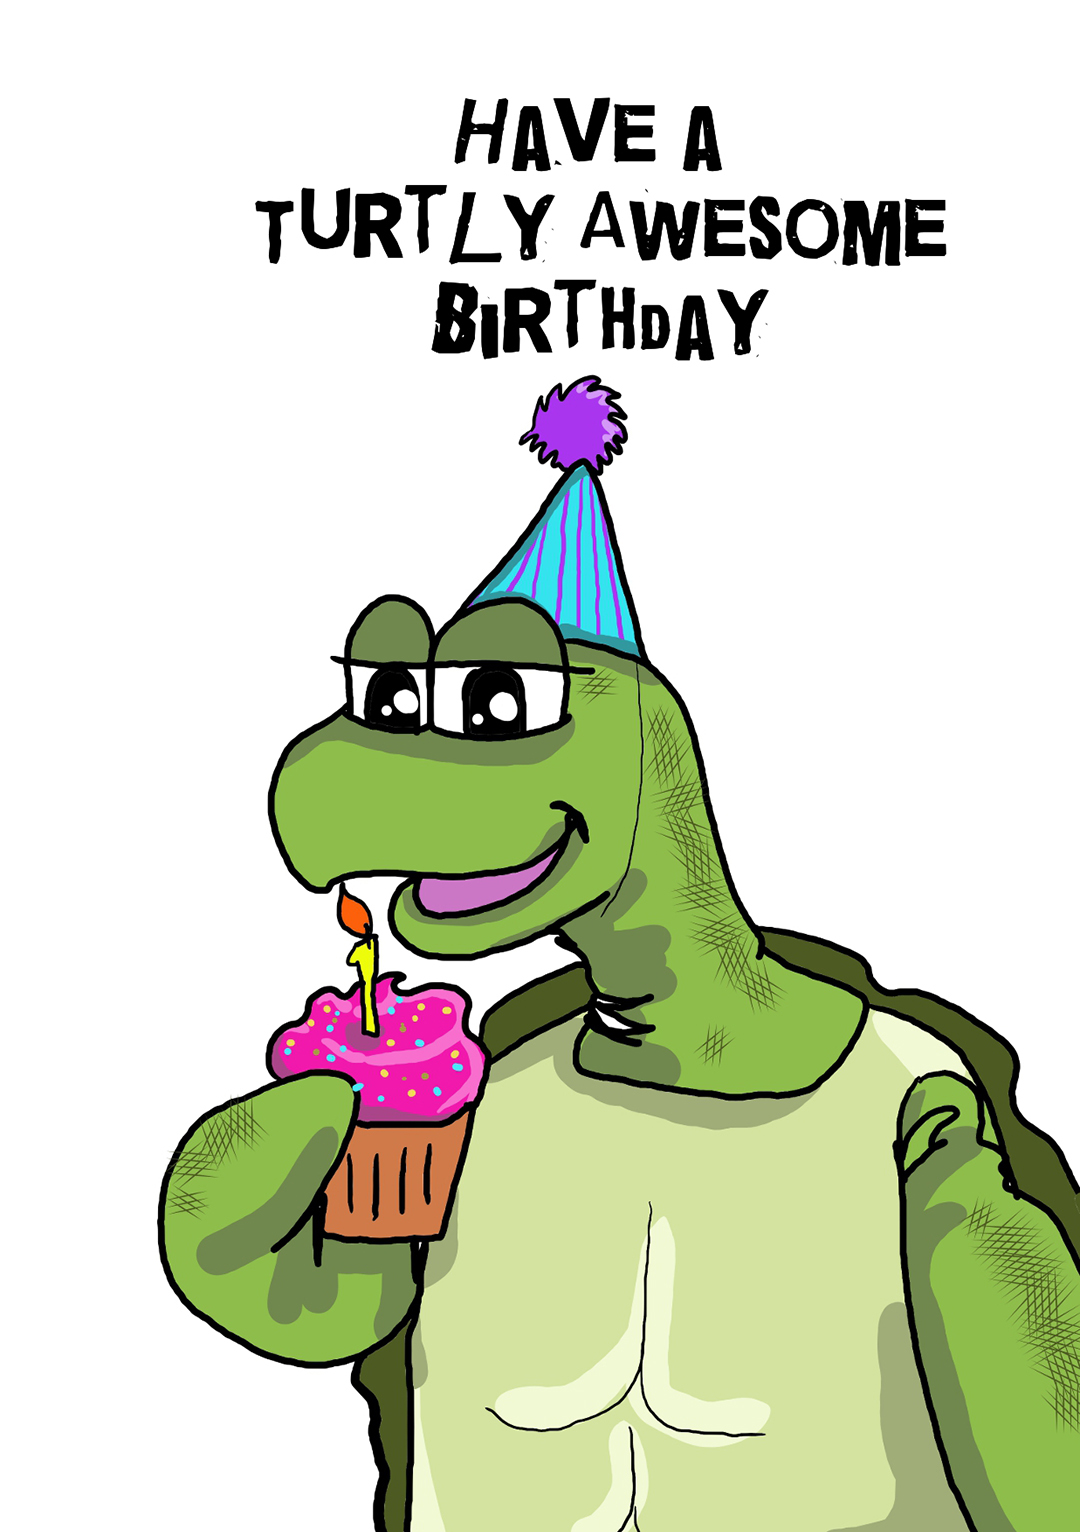 Have A Turtley Awesome Birthday - Cute Greeting Card